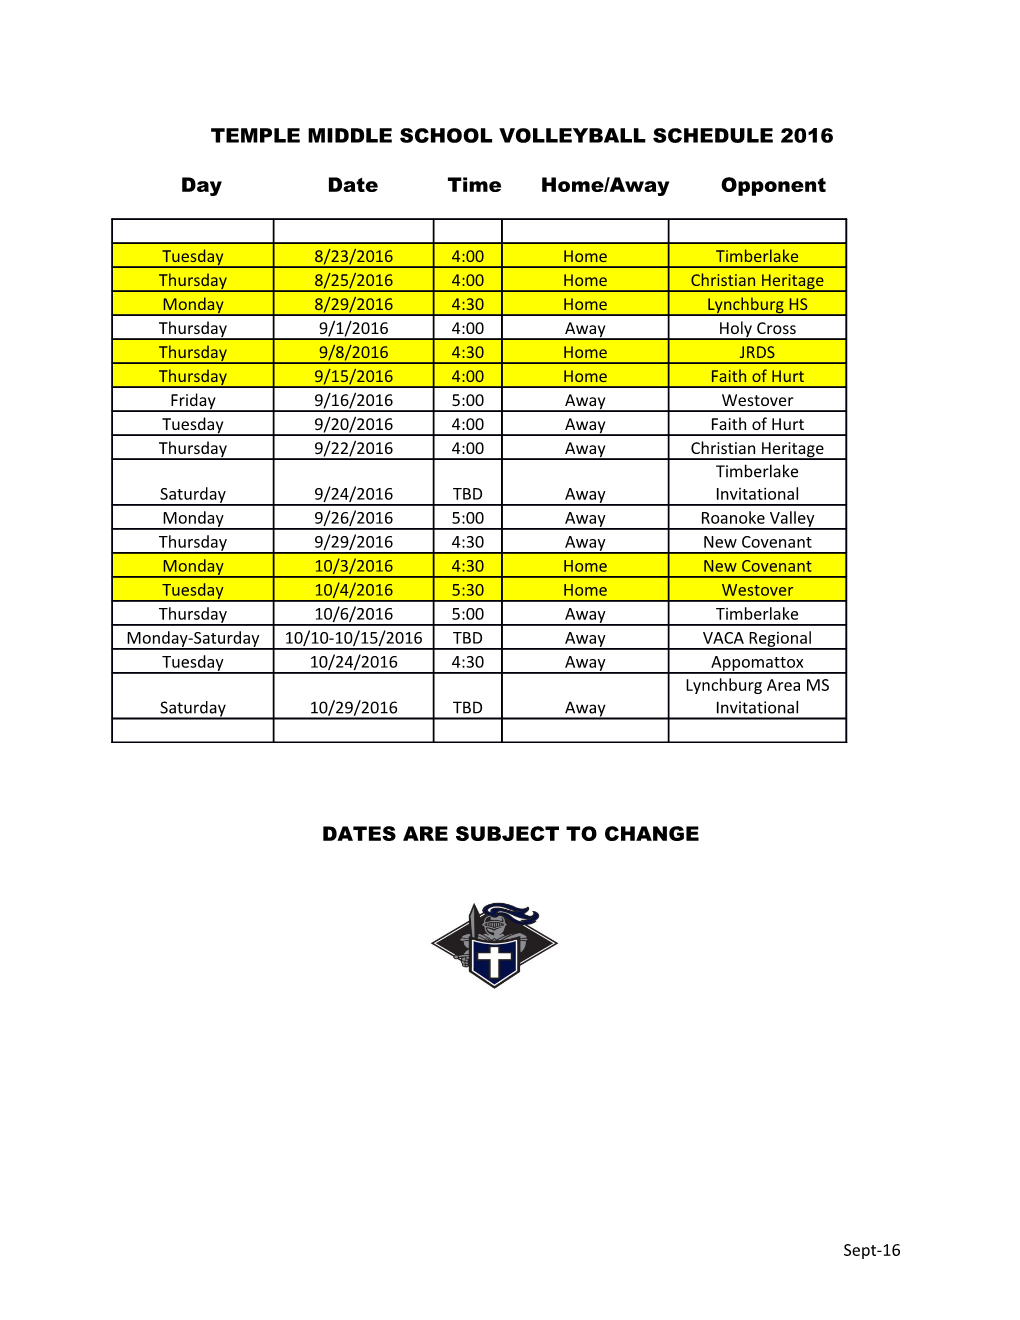 Temple Middle School Volleyball Schedule 2016